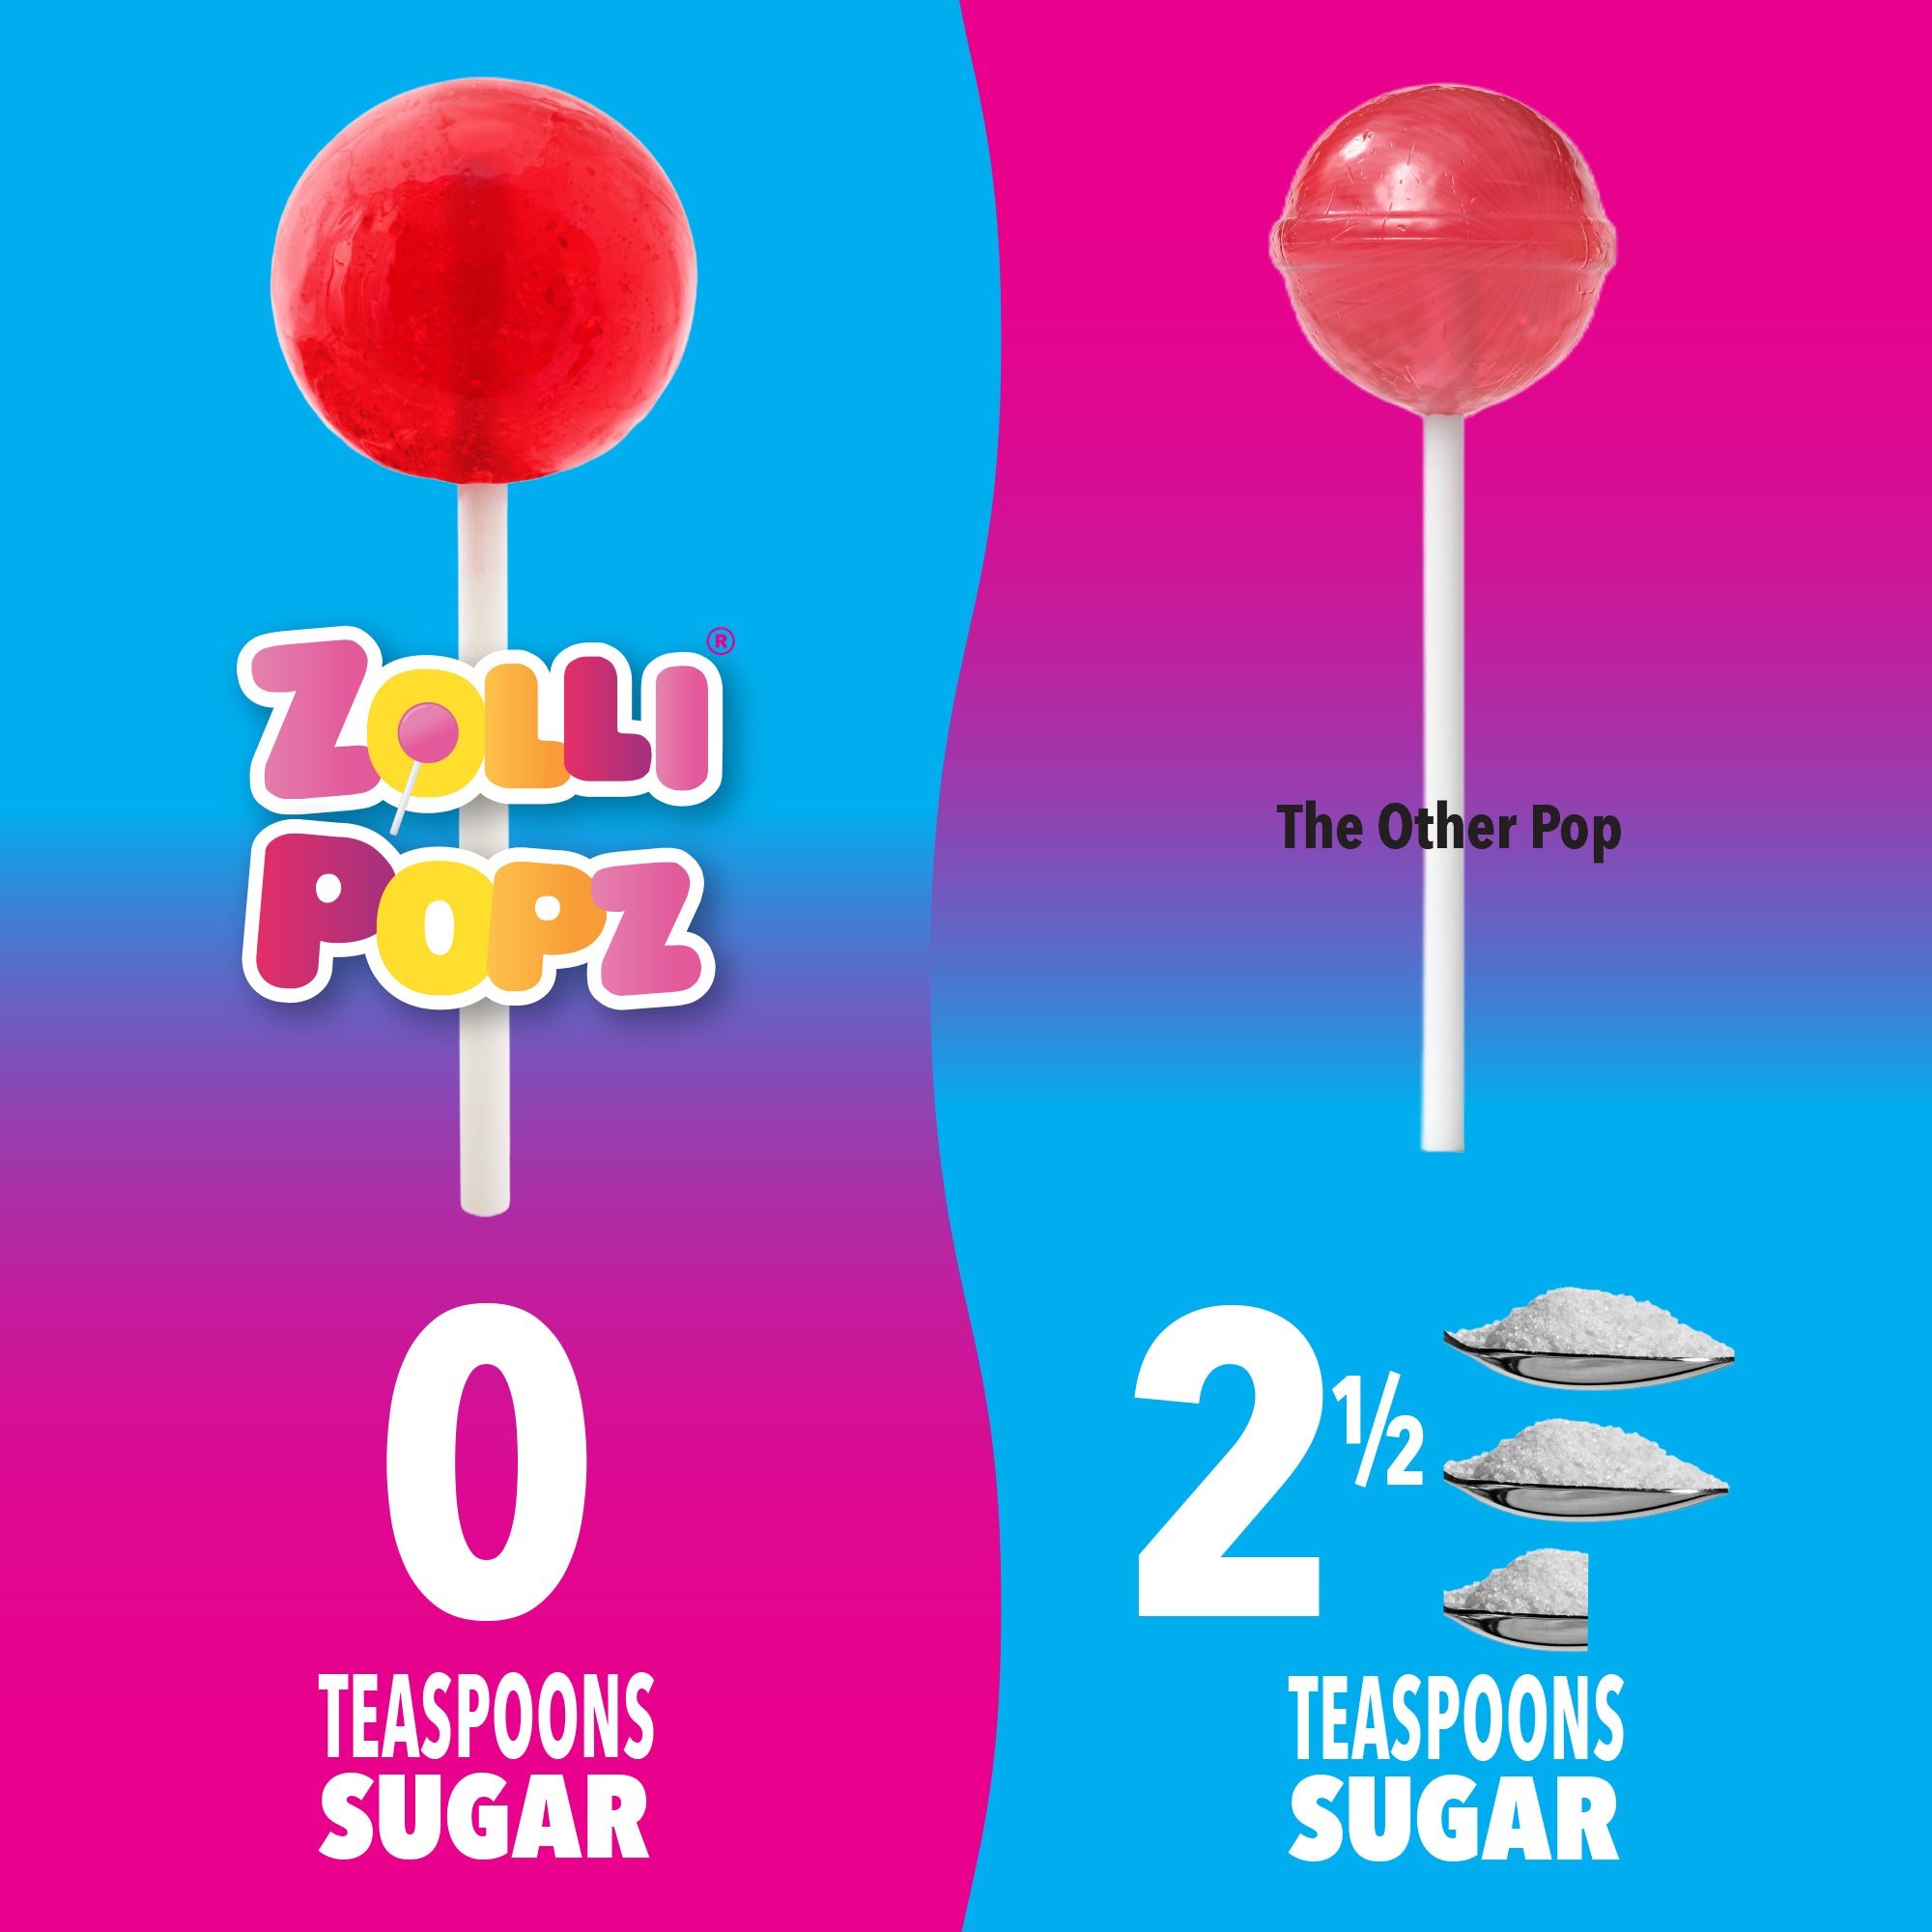 Zollipops have 0 teaspoons of sugar. Competing lollipops have 2.5 teaspoons of sugar.